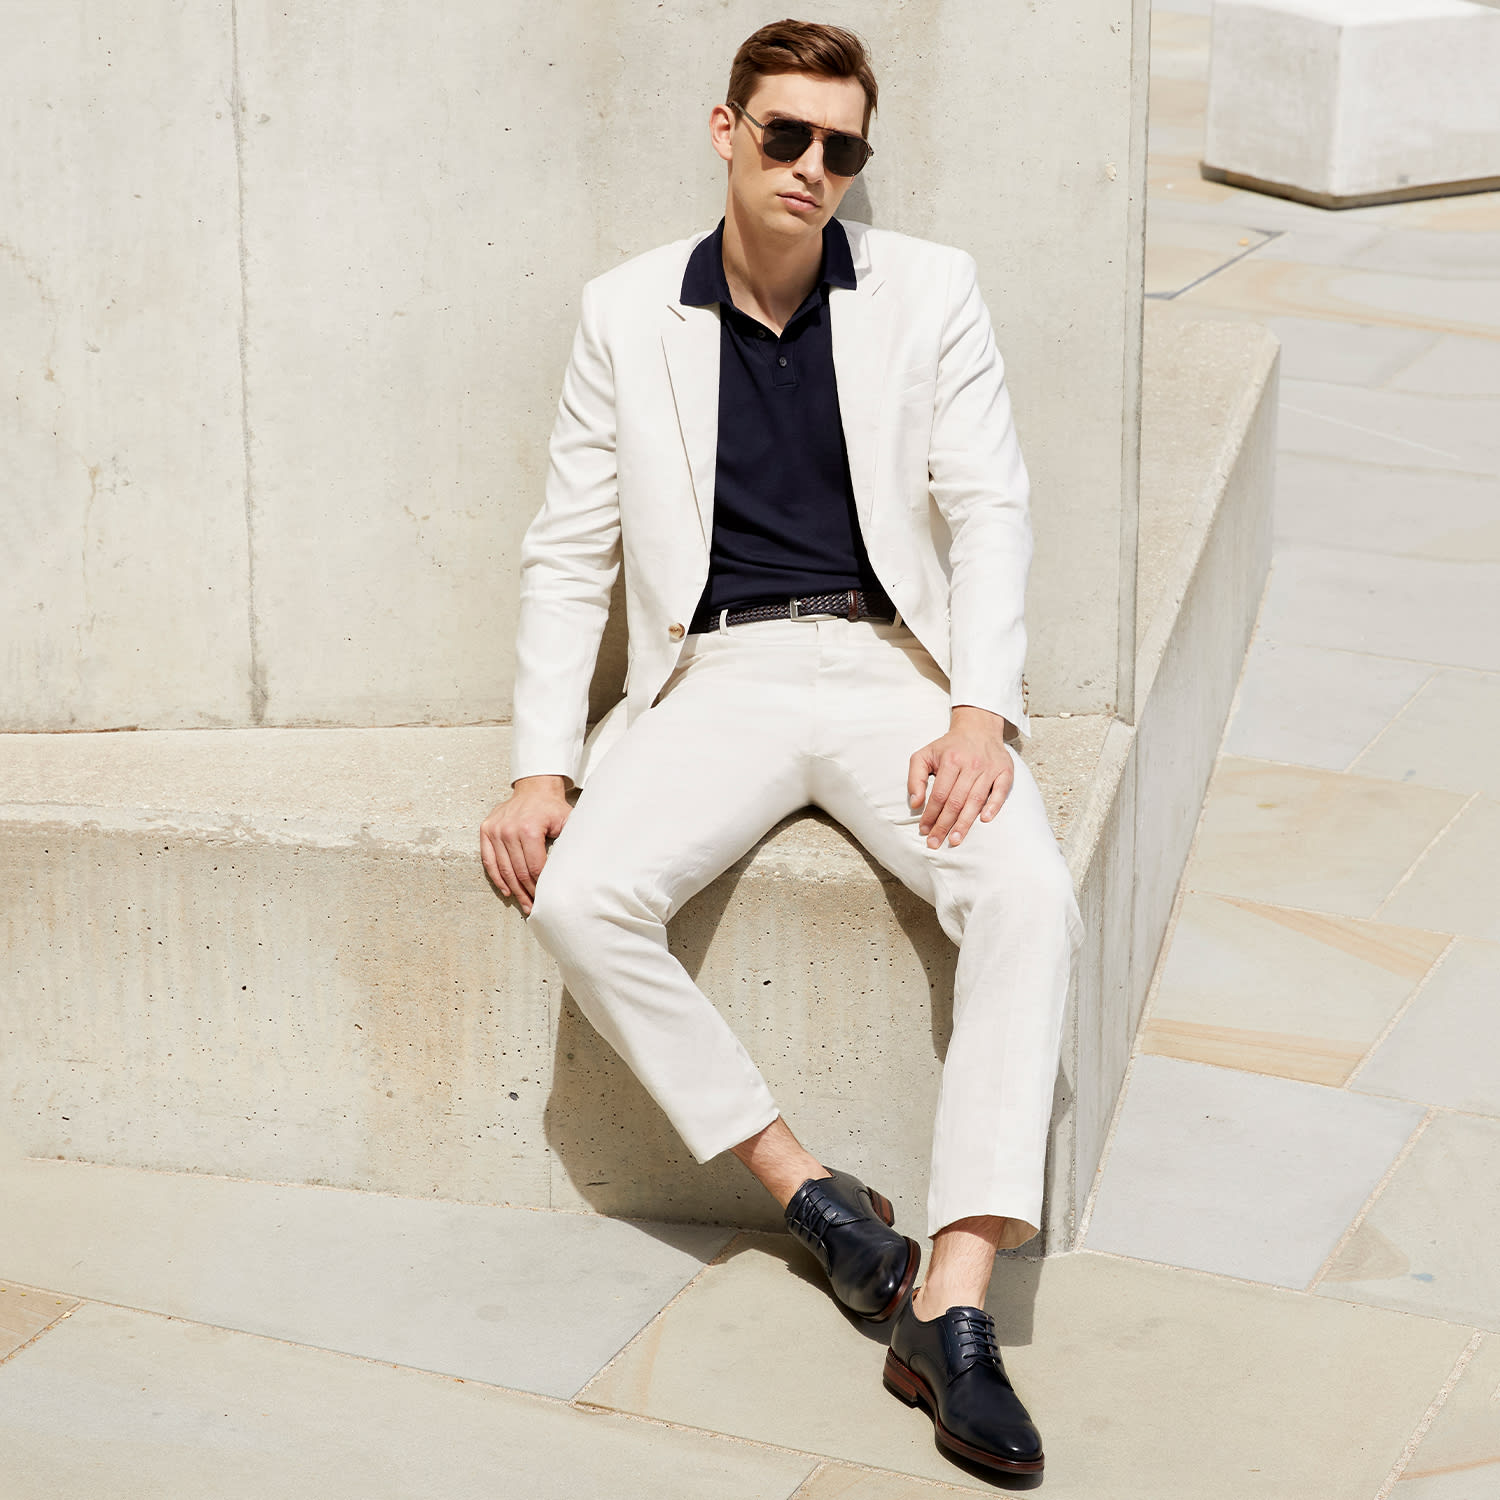 The Style Series: Men's City Smart Sinclairs